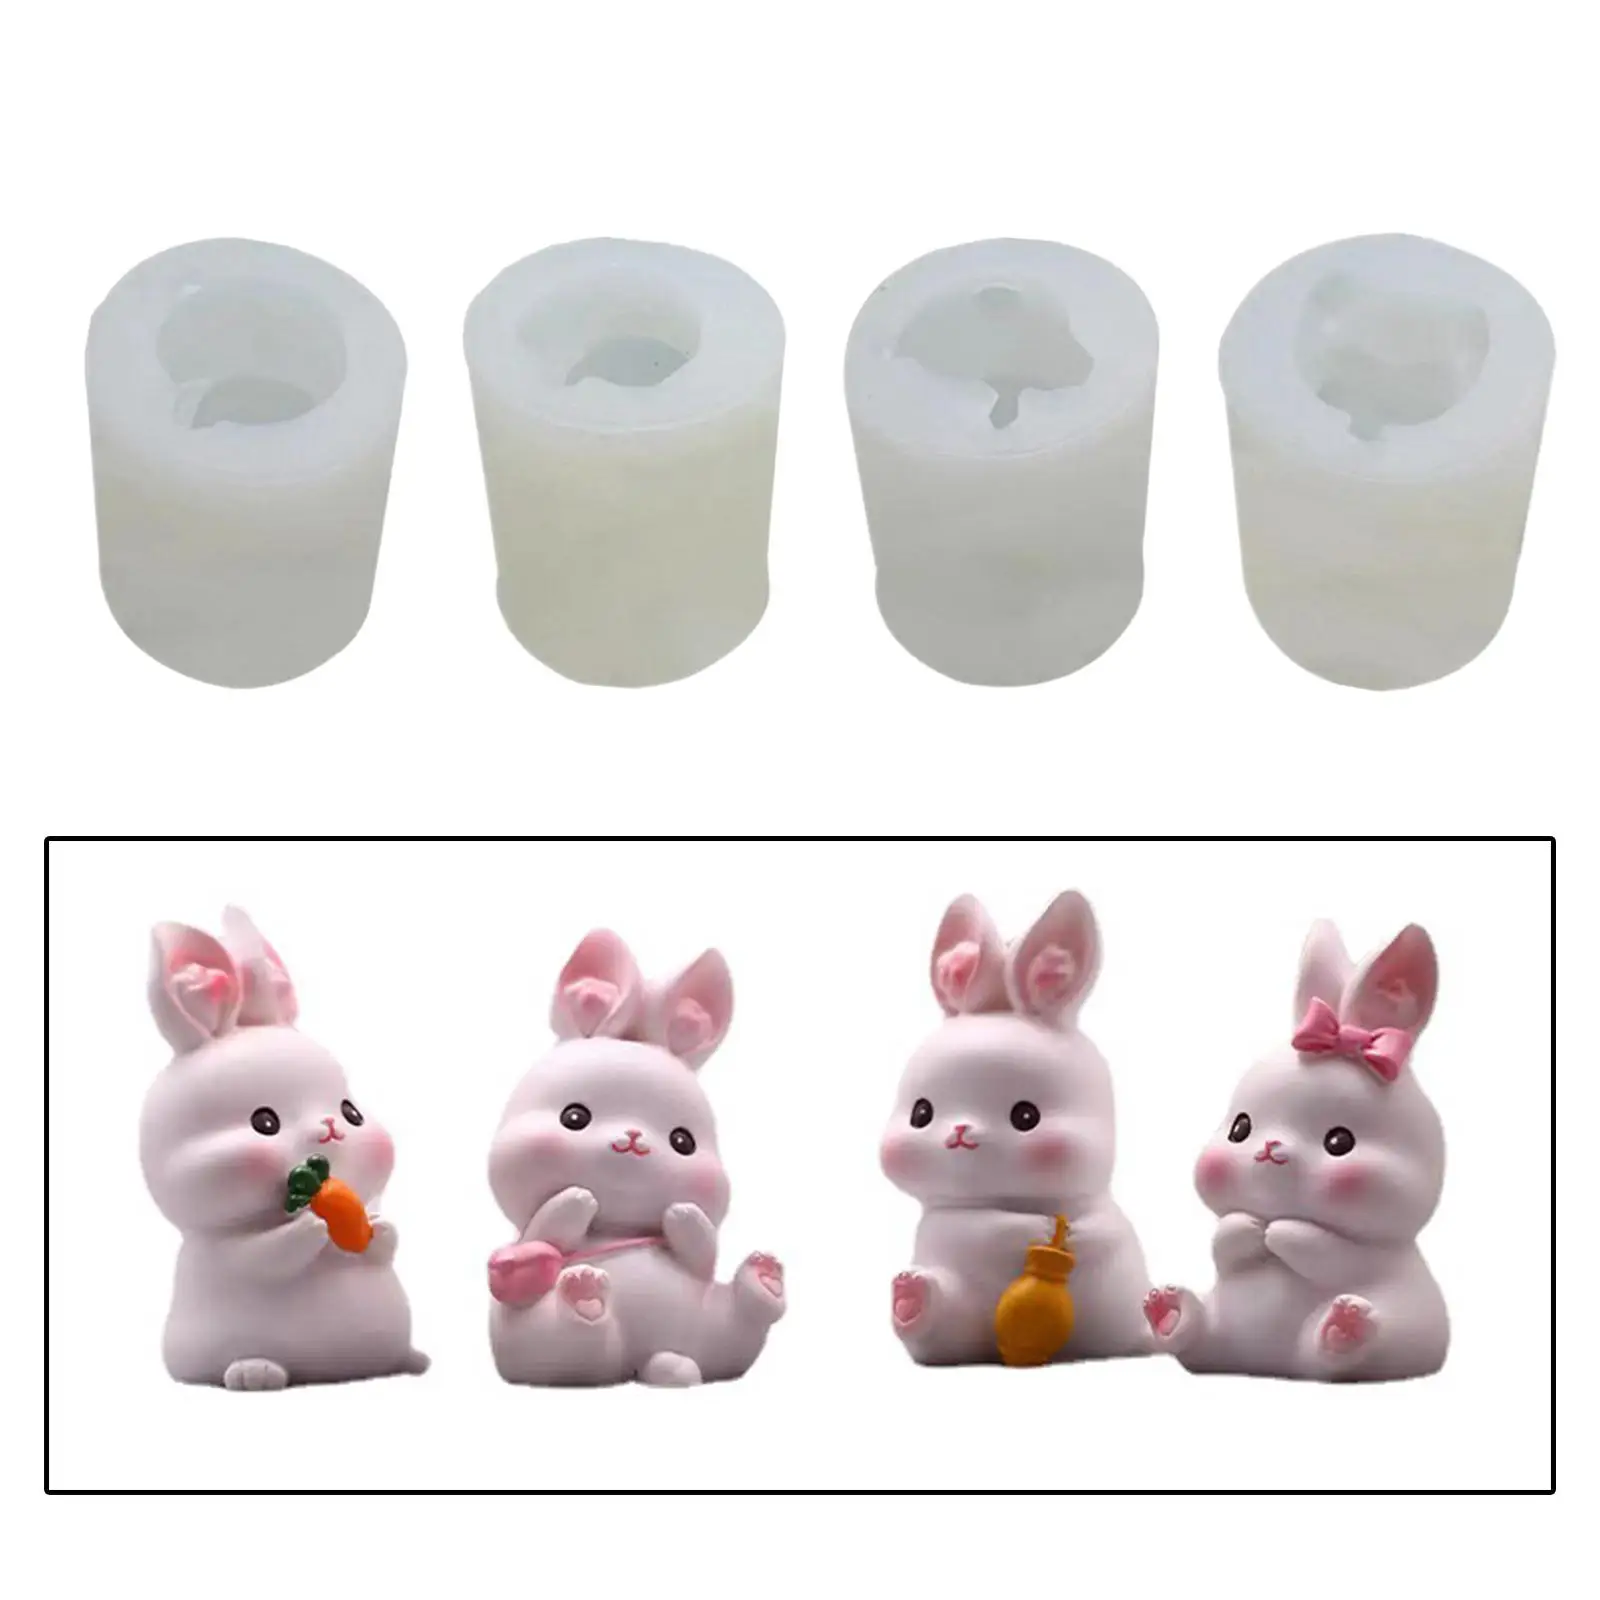 4 Pieces Bunny Chocolate Moulds Bunny Cake Moulds Cake Moulds Bunny Baking Mould for Holiday Fondant Dessert Jelly Cake